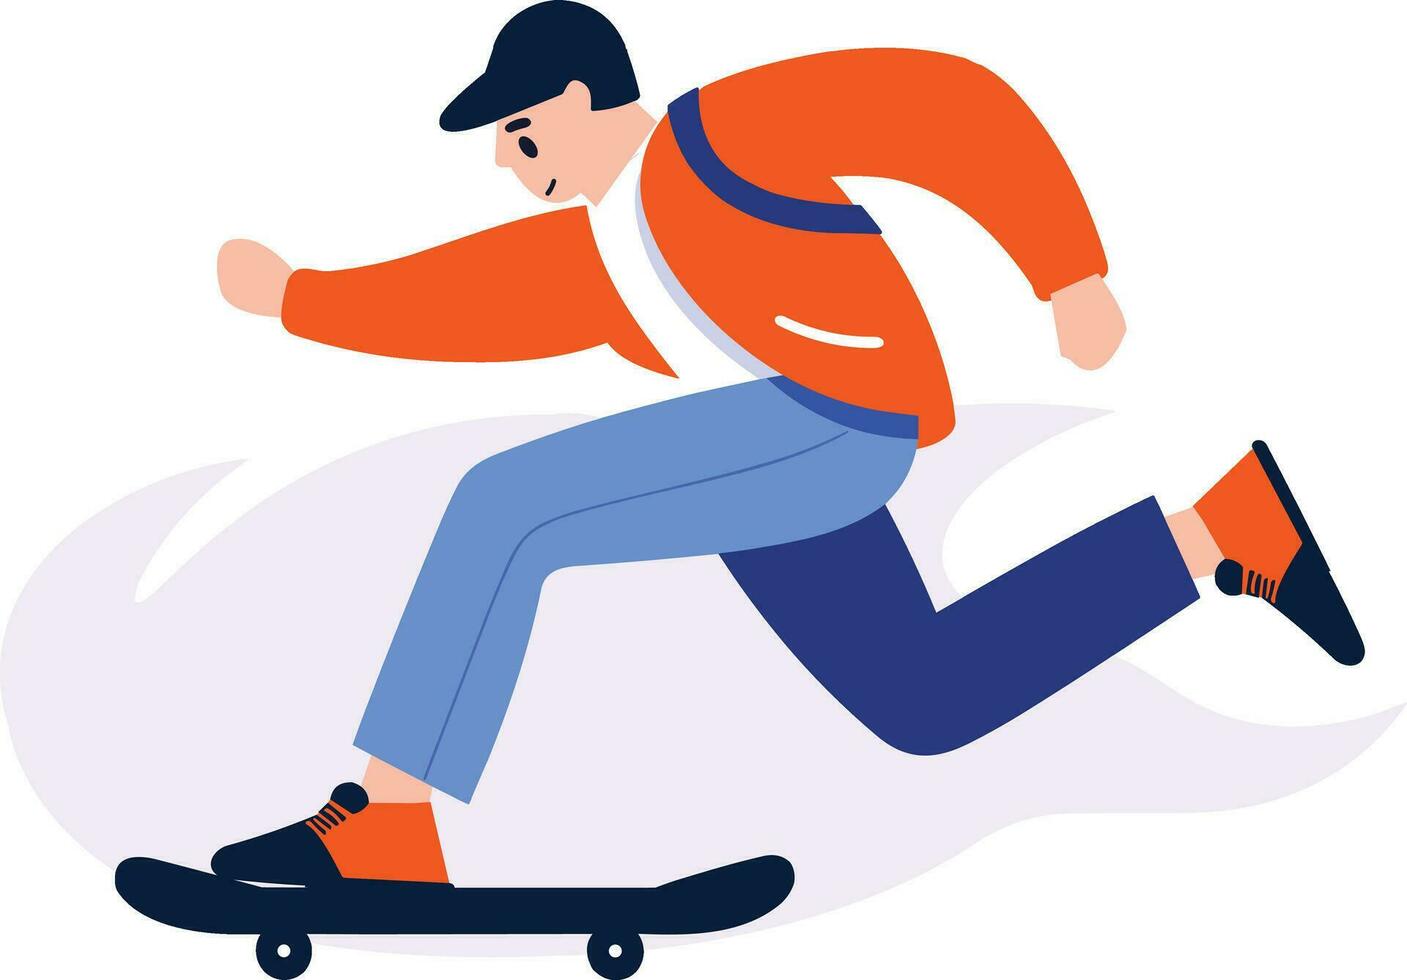 Hand Drawn Teenage characters playing skateboards in flat style vector